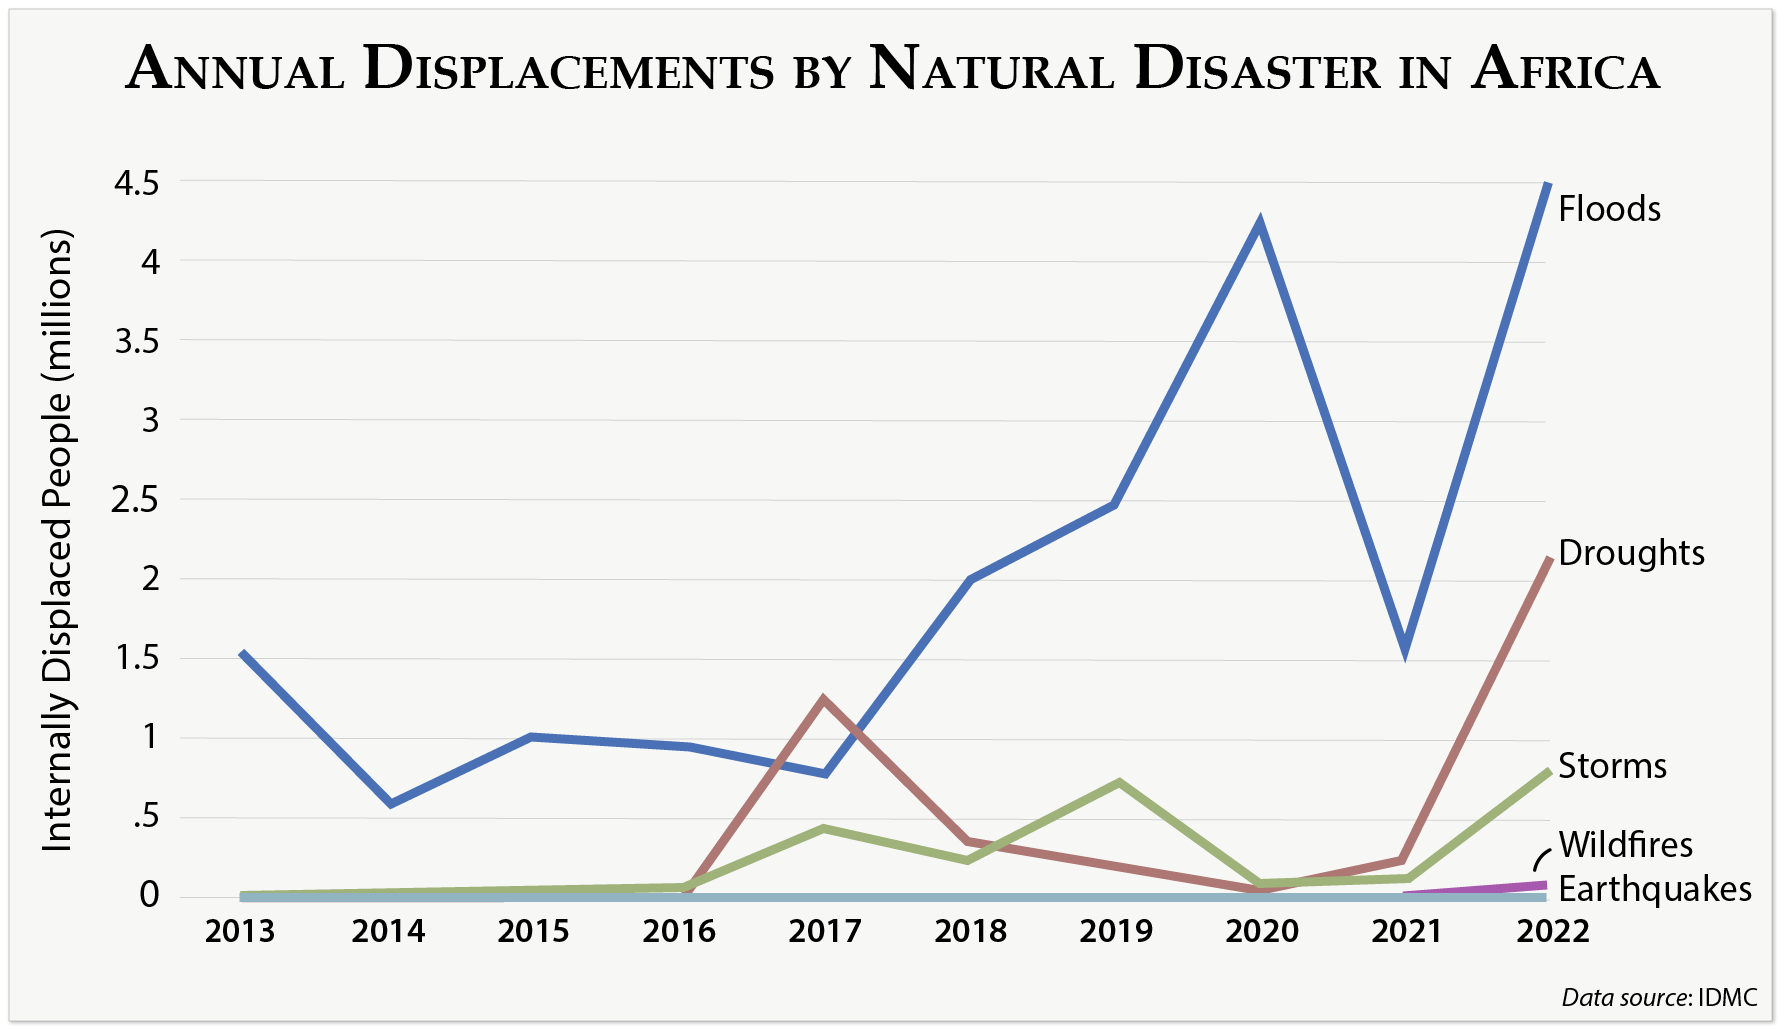 Annual Displacements by Natural Disaster in Africa